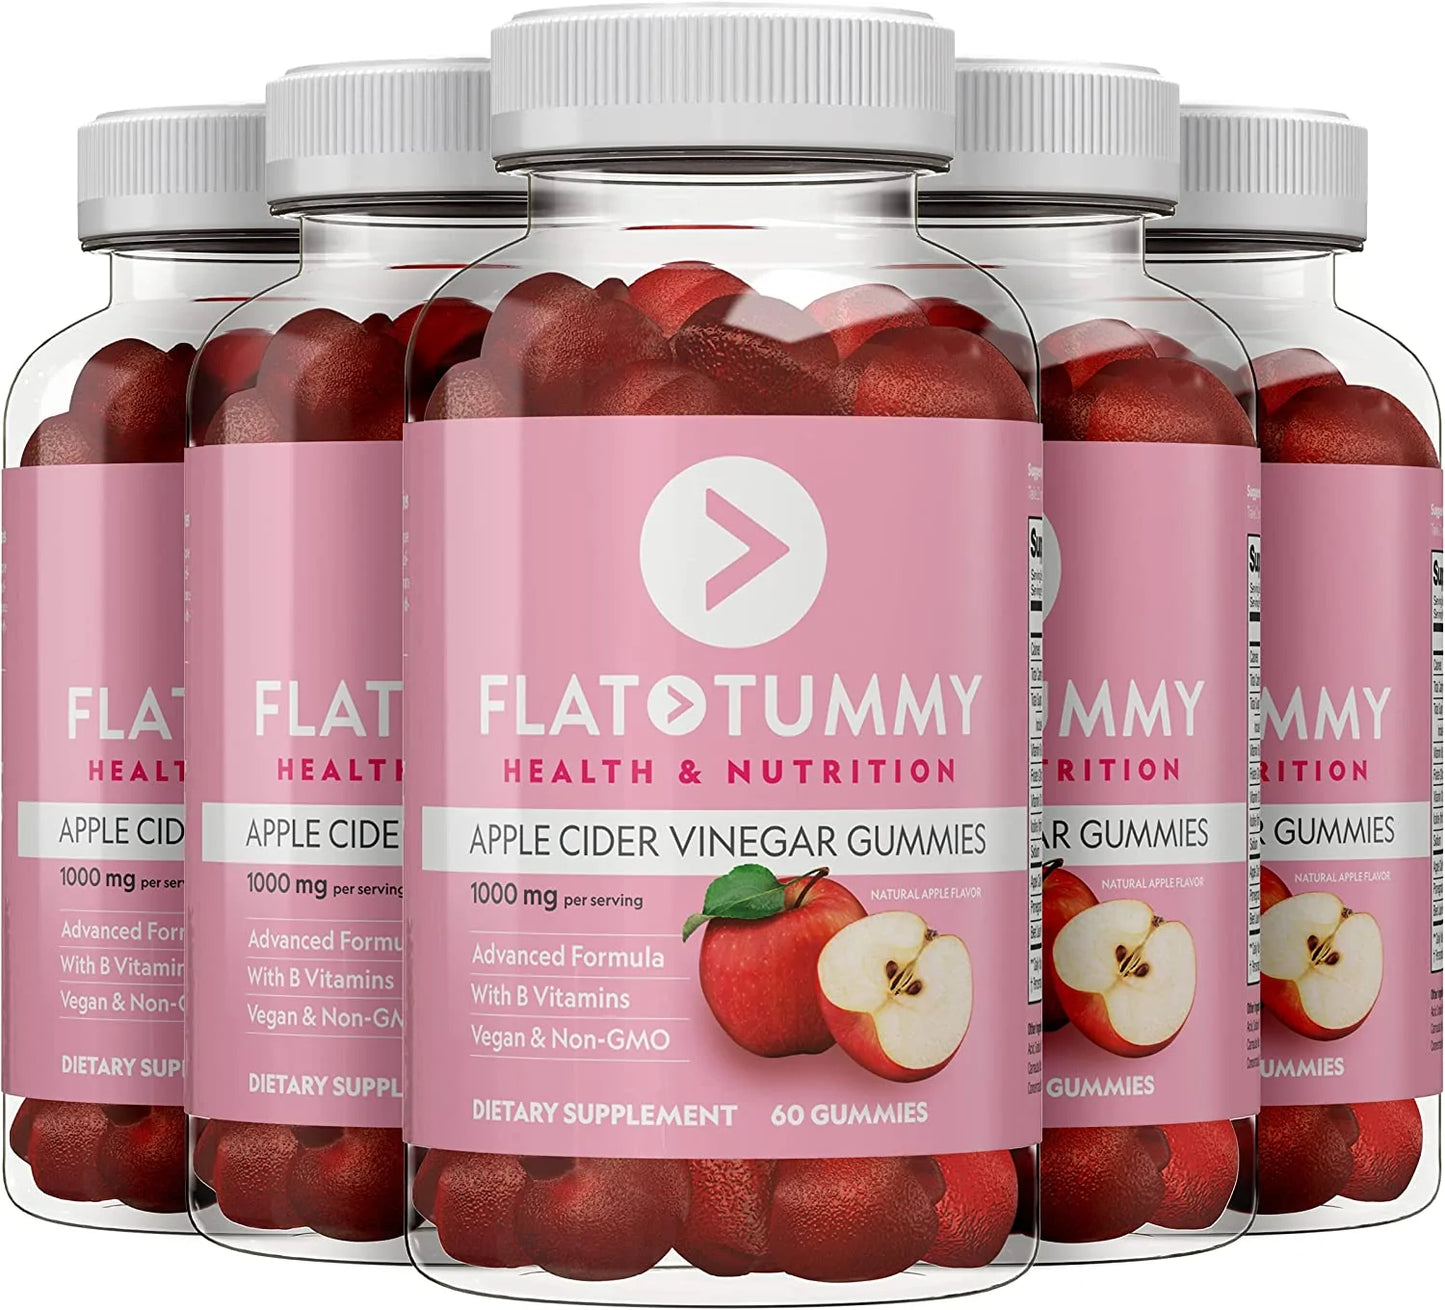 Flat Tummy Apple Cider Vinegar Gummies, 60 Count – Boost Energy, Detox & Support Gut Health – Vegan, Non-GMO – ACV Gummies with Mother - Made with Apples, Beetroot, Vitamin B9, Vitamin B12, Superfoods